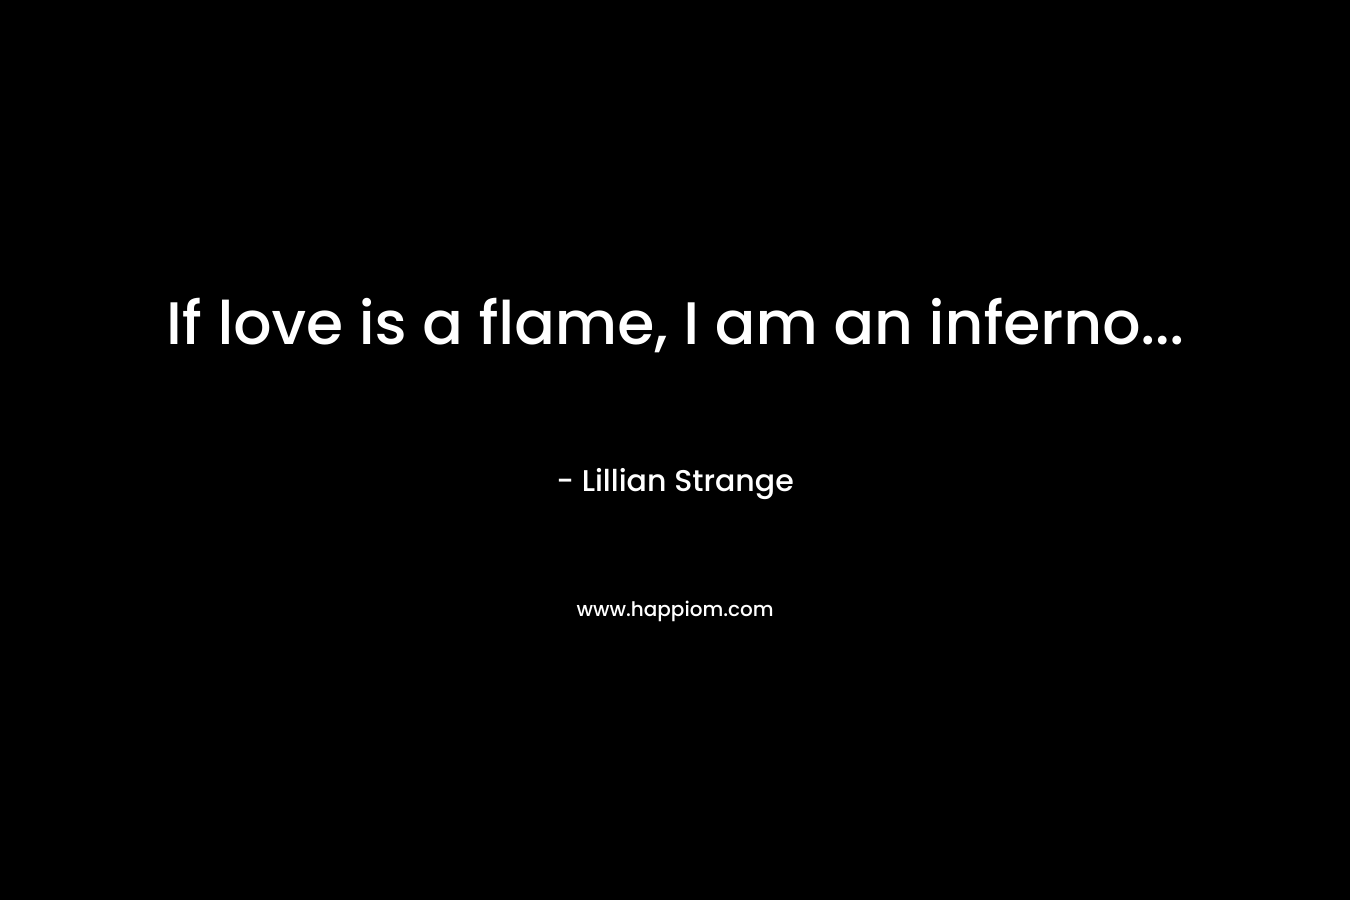 If love is a flame, I am an inferno...